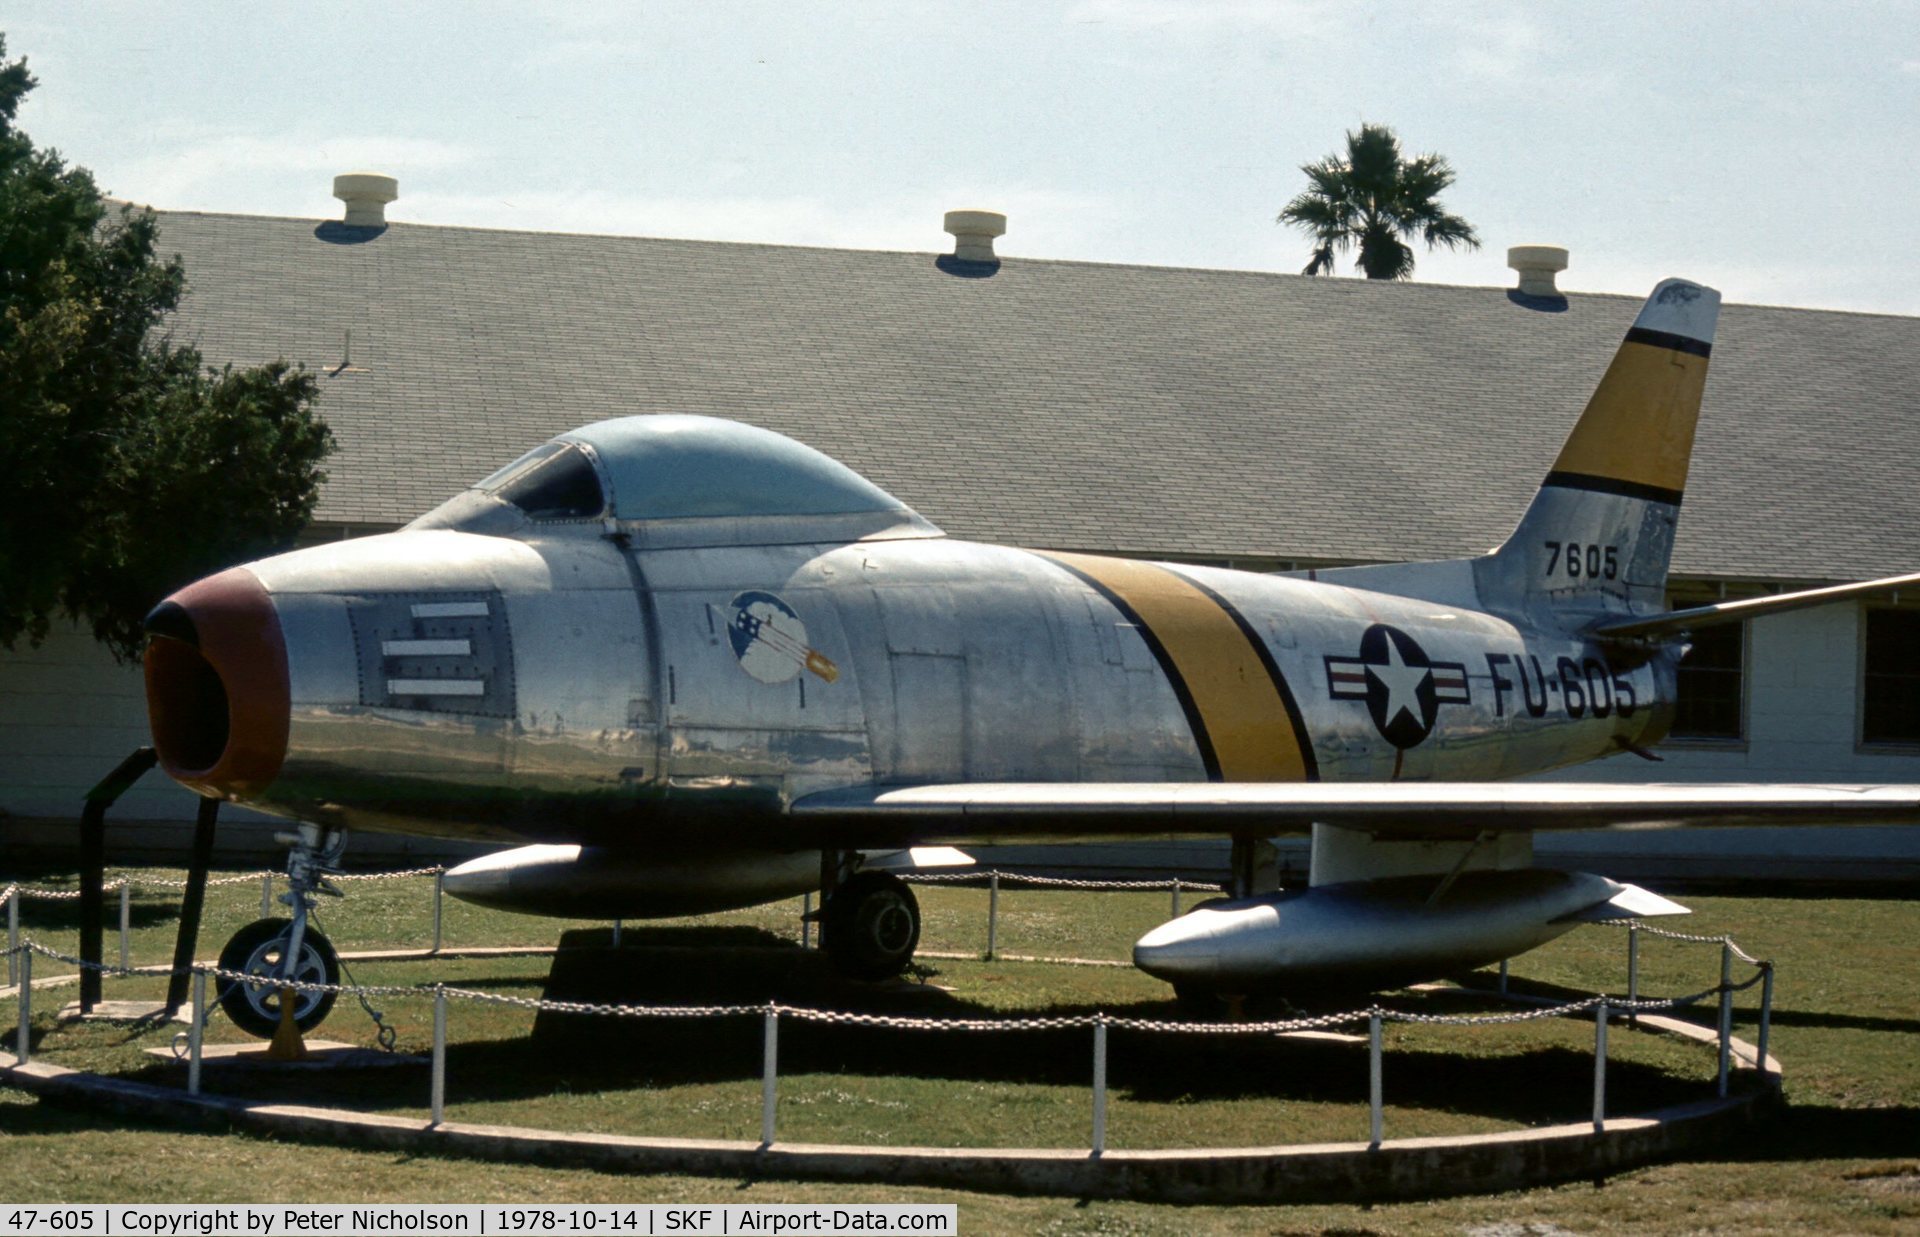 47-605, 1947 North American F-86A Sabre C/N 151-38432, Another view of Lackland's F-86A Sabre in 1978.